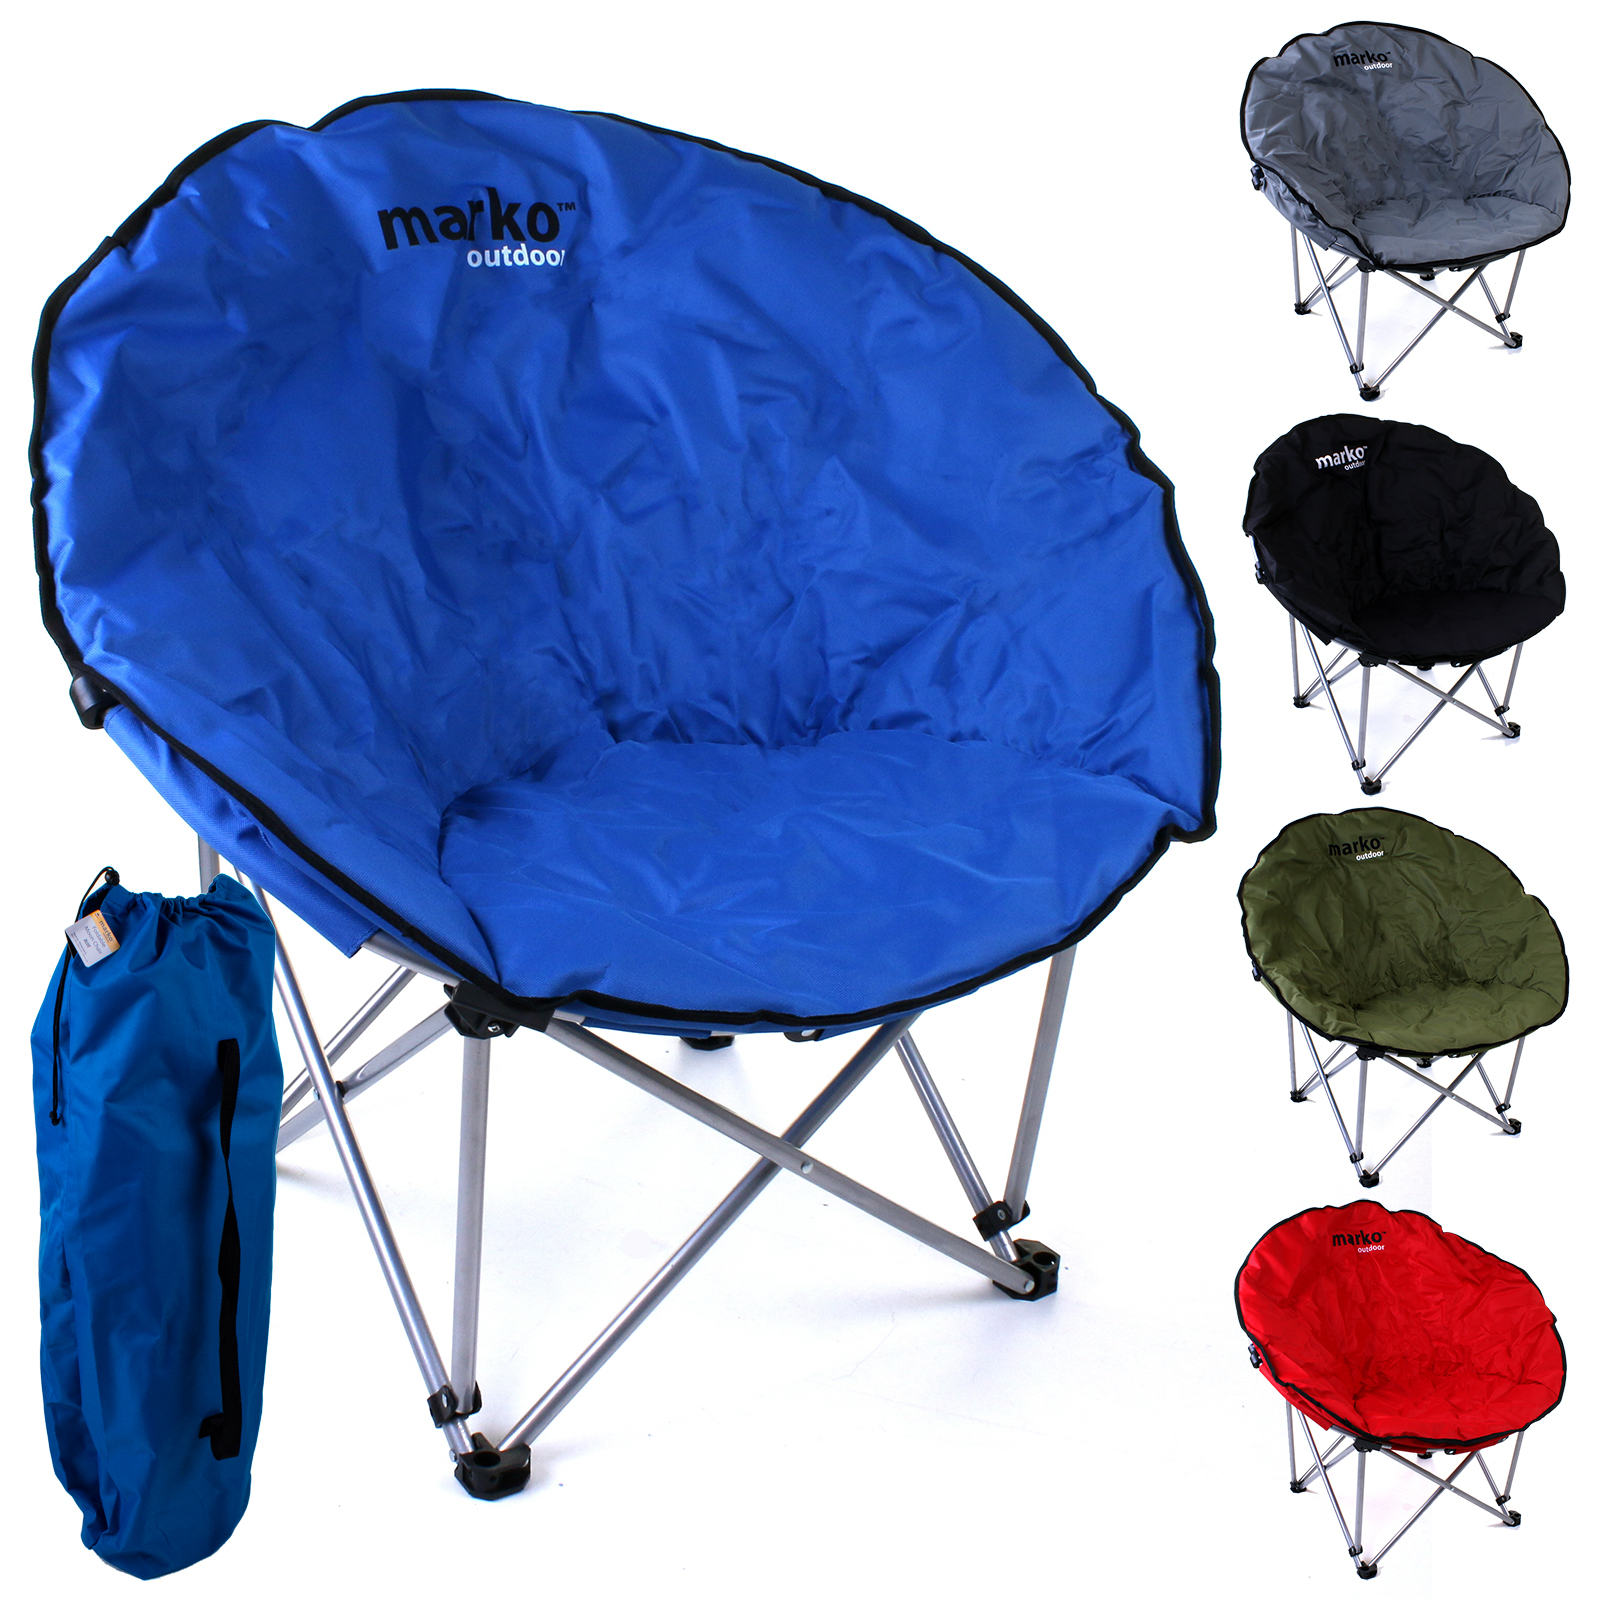 Simple Camping Moon Chair Kmart for Small Space